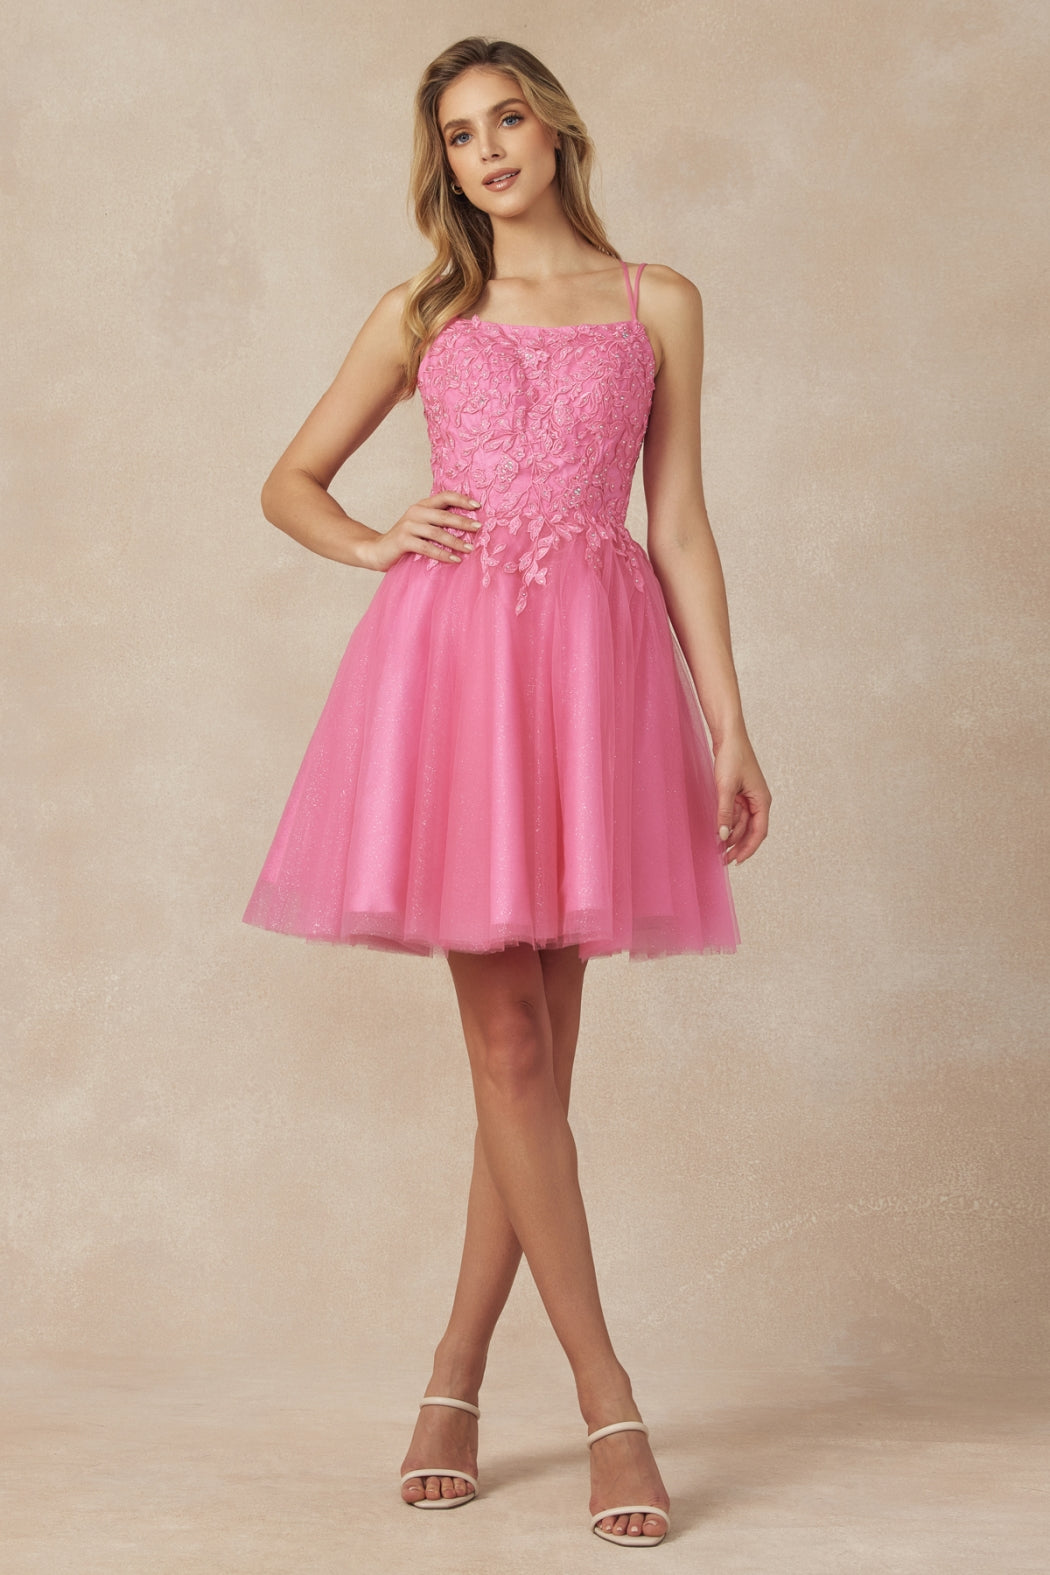 Spaghetti Straps Embroidered Bodice Short Cocktail & Homecoming Dress JT860 Elsy Style Cocktail Dress